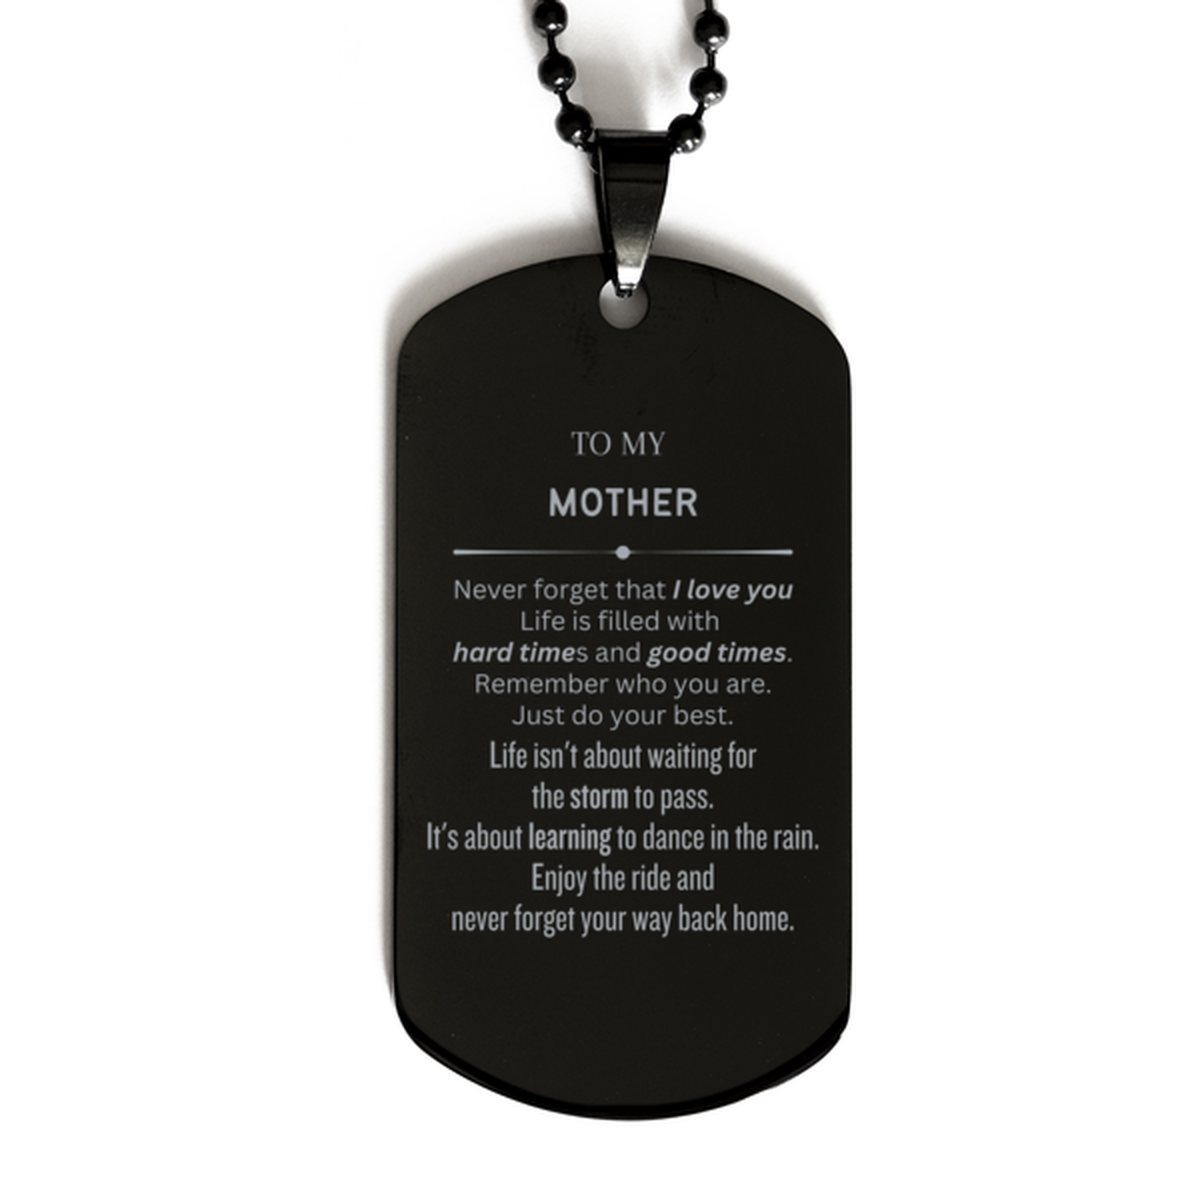 Christmas Mother Black Dog Tag Gifts, To My Mother Birthday Thank You Gifts For Mother, Graduation Unique Gifts For Mother To My Mother Never forget that I love you life is filled with hard times and good times. Remember who you are. Just do your best